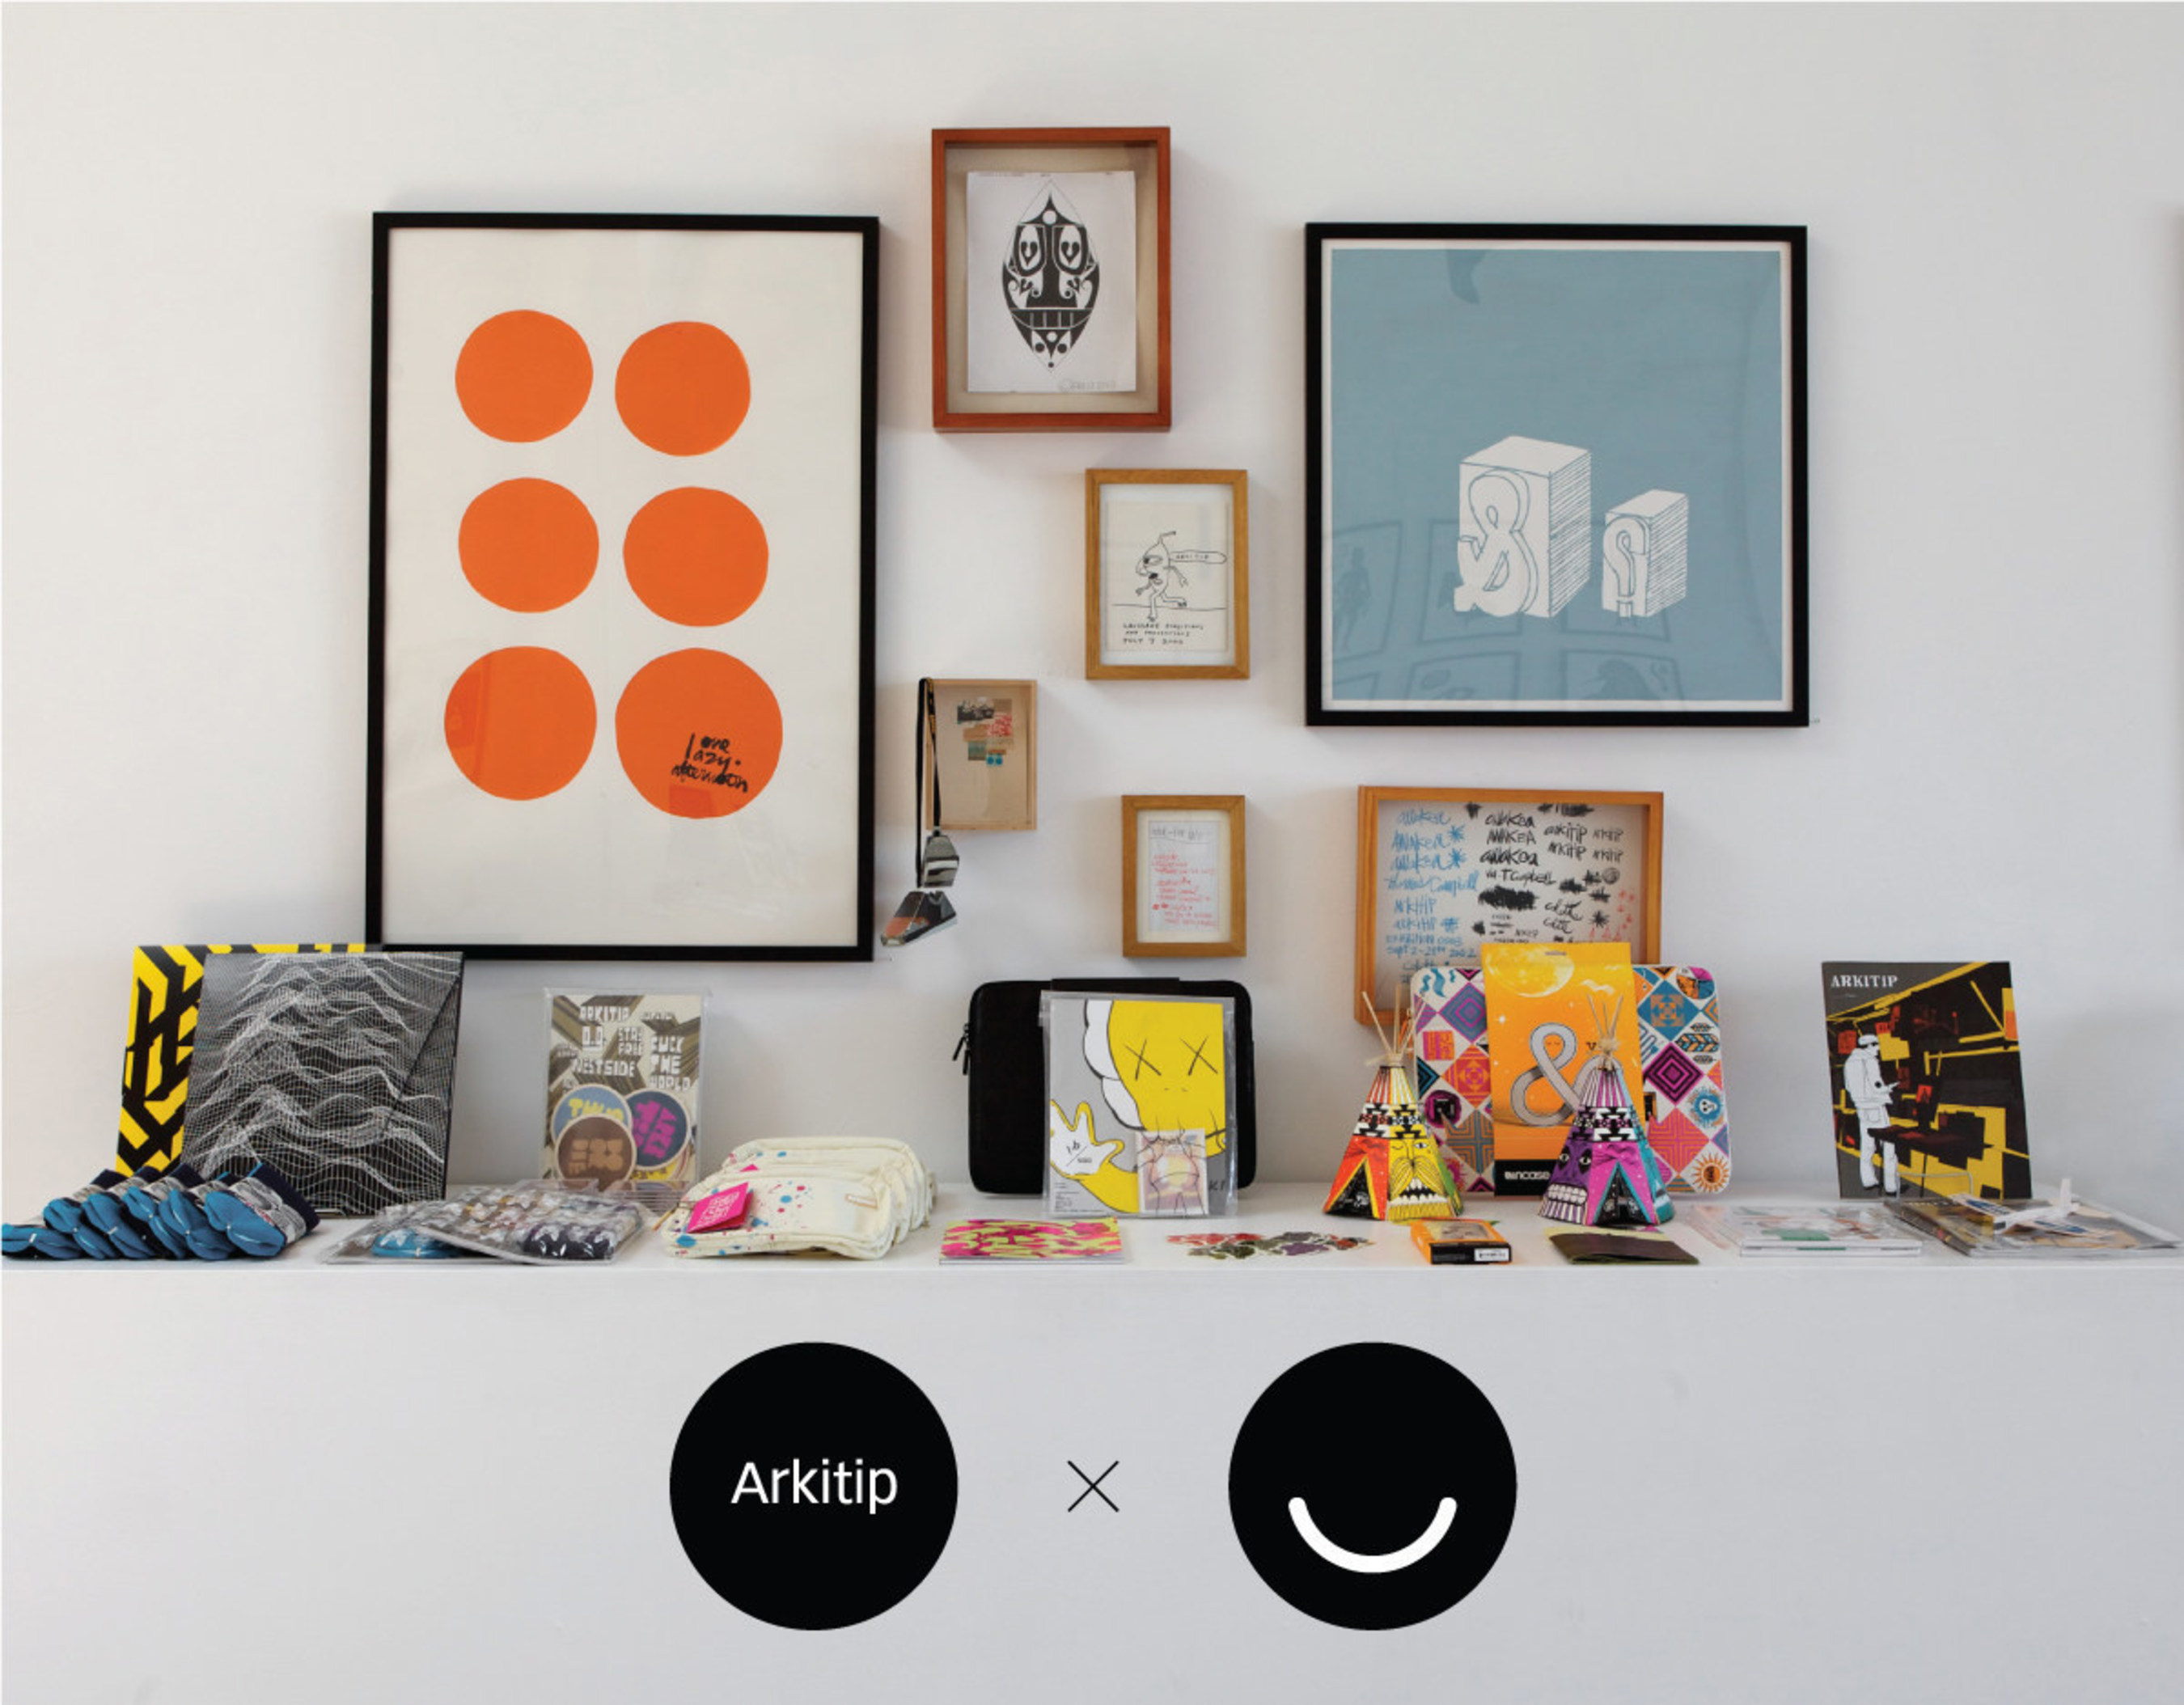 Announcing the Arkitip x Ello Juried Art Exhibition; Get Published - Win 1 of 4 $1,000 Art Grants